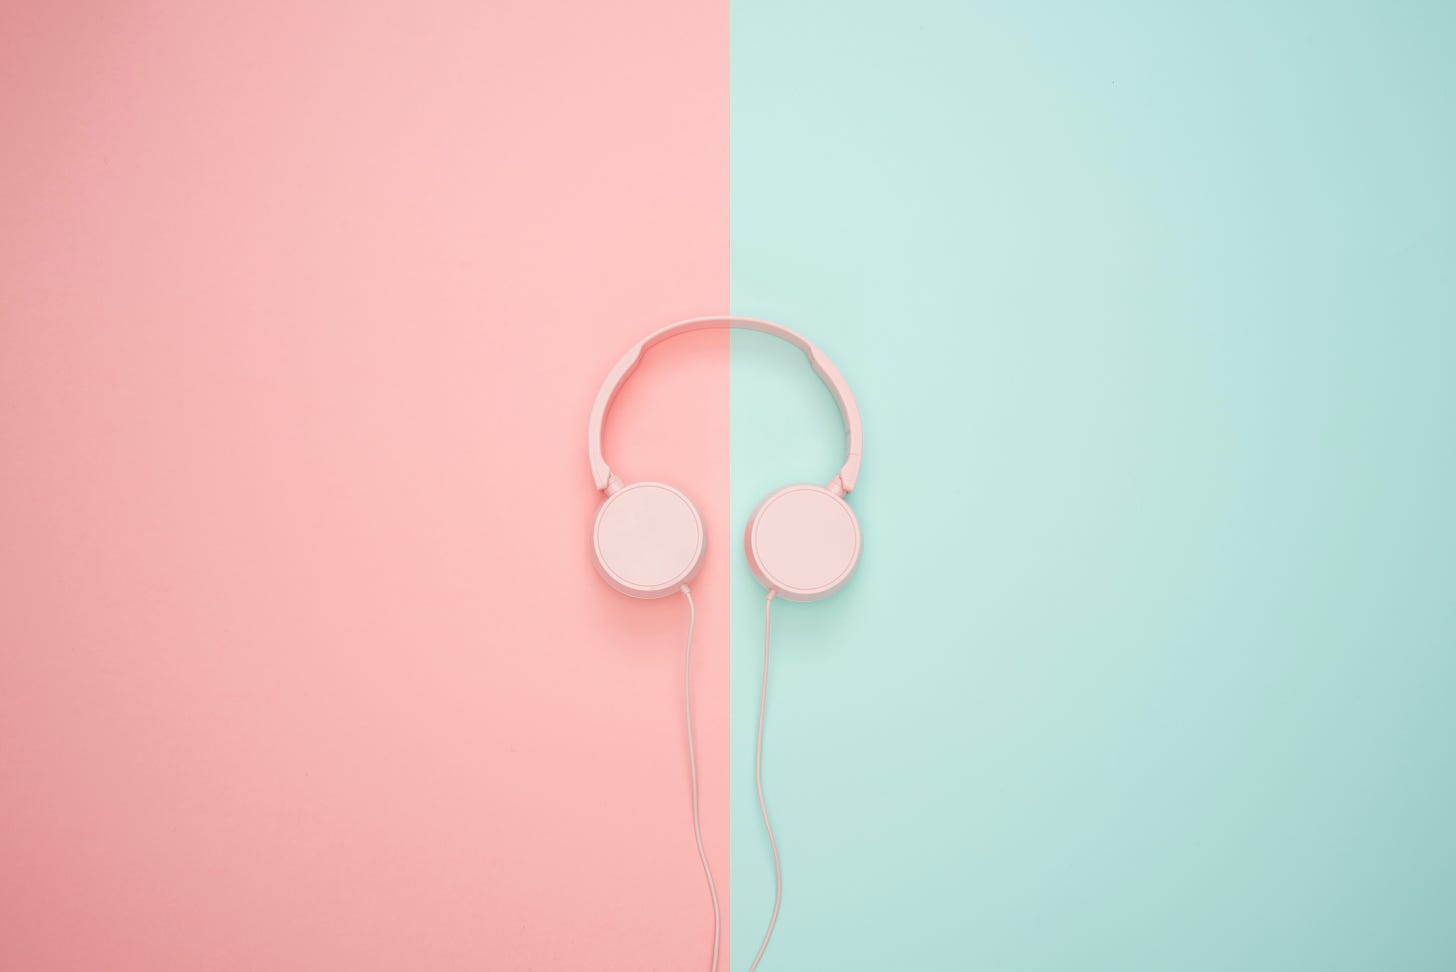 A stock image of pink headphones on a pink and mint green background